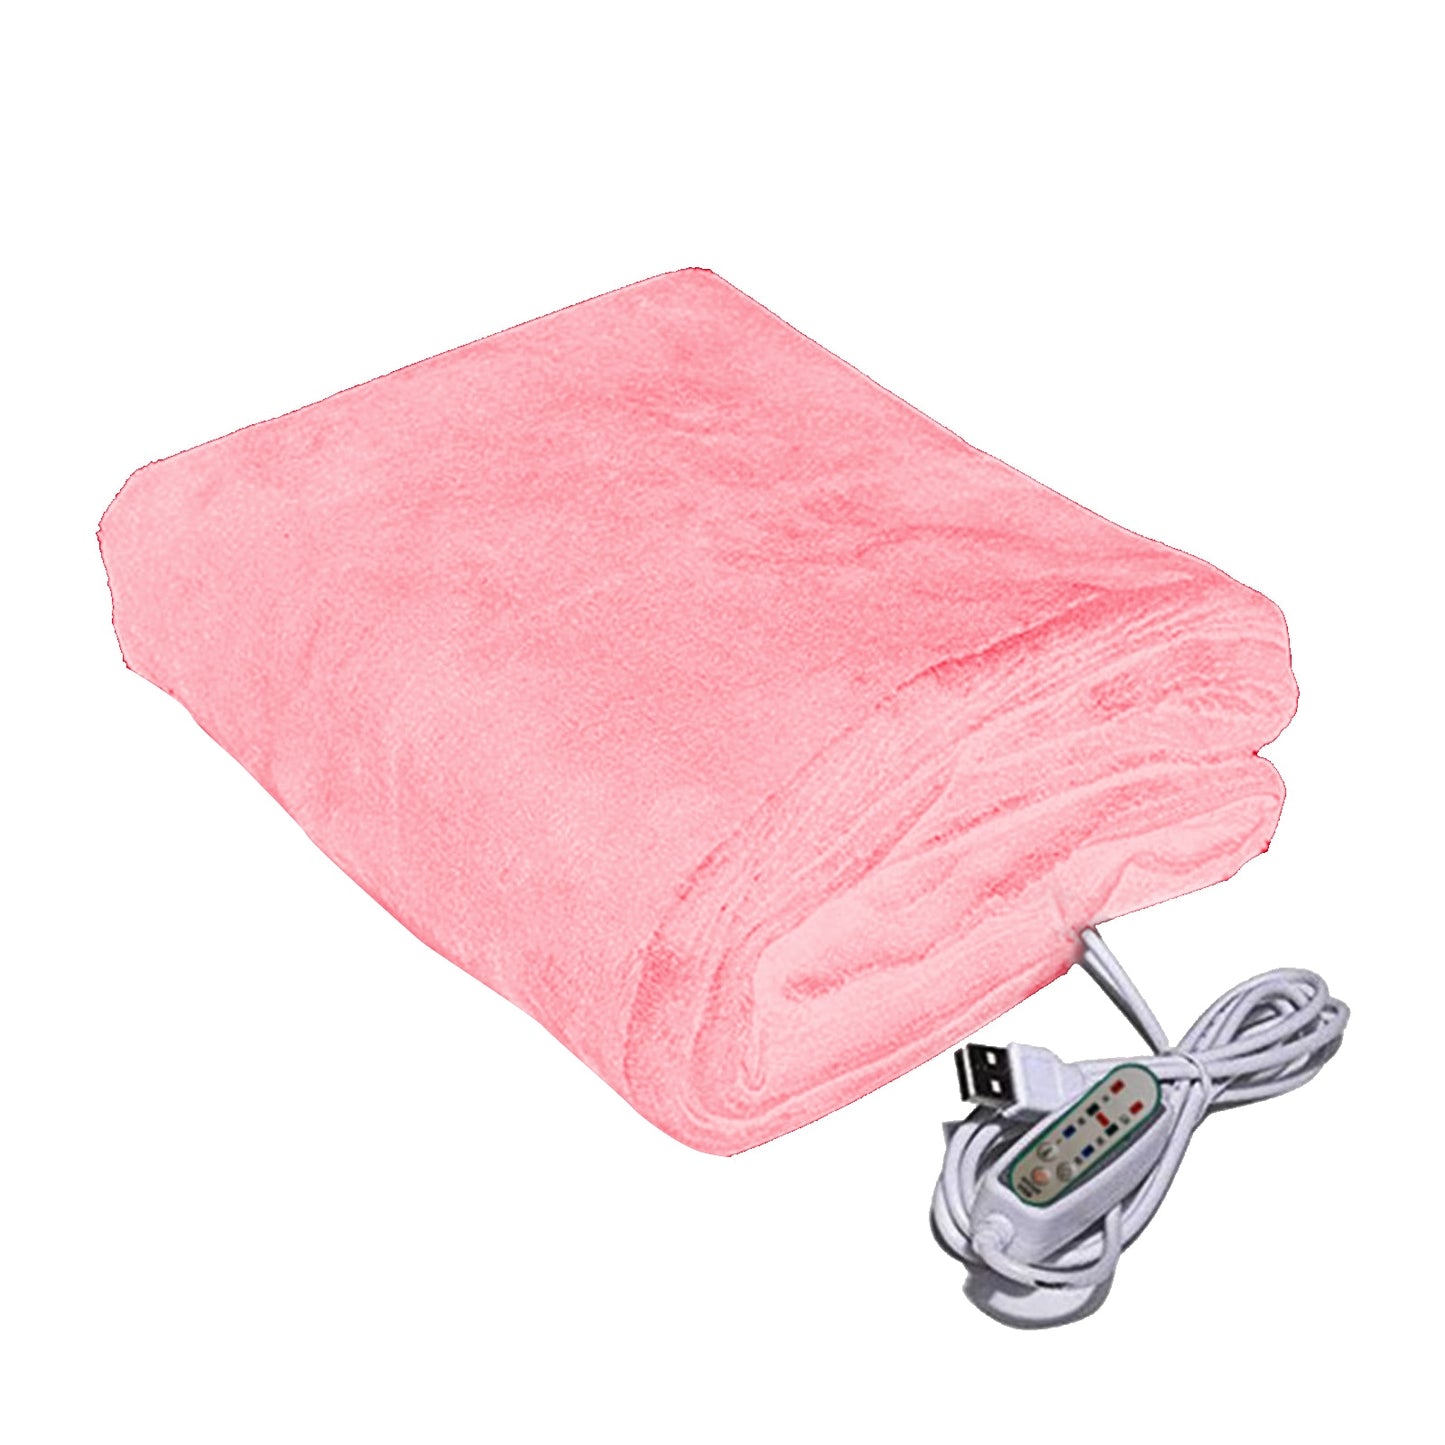 Machine Washable Electric Blanket Thermostat Soft Plush Home Office